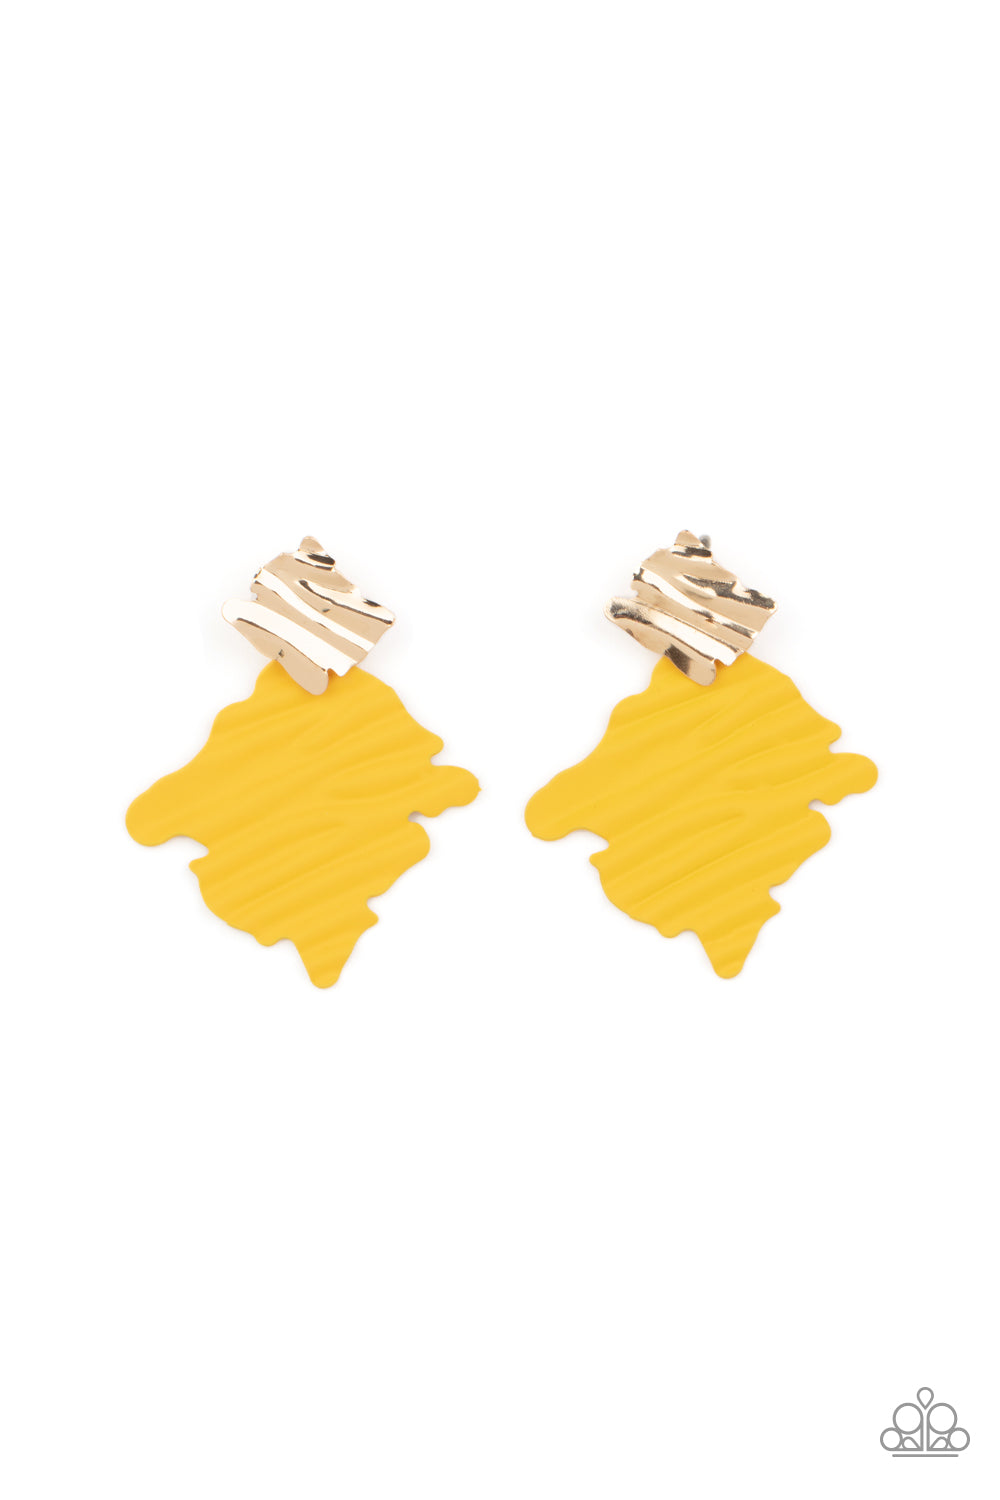 Crimped Couture Yellow Post Earrings - Paparazzi